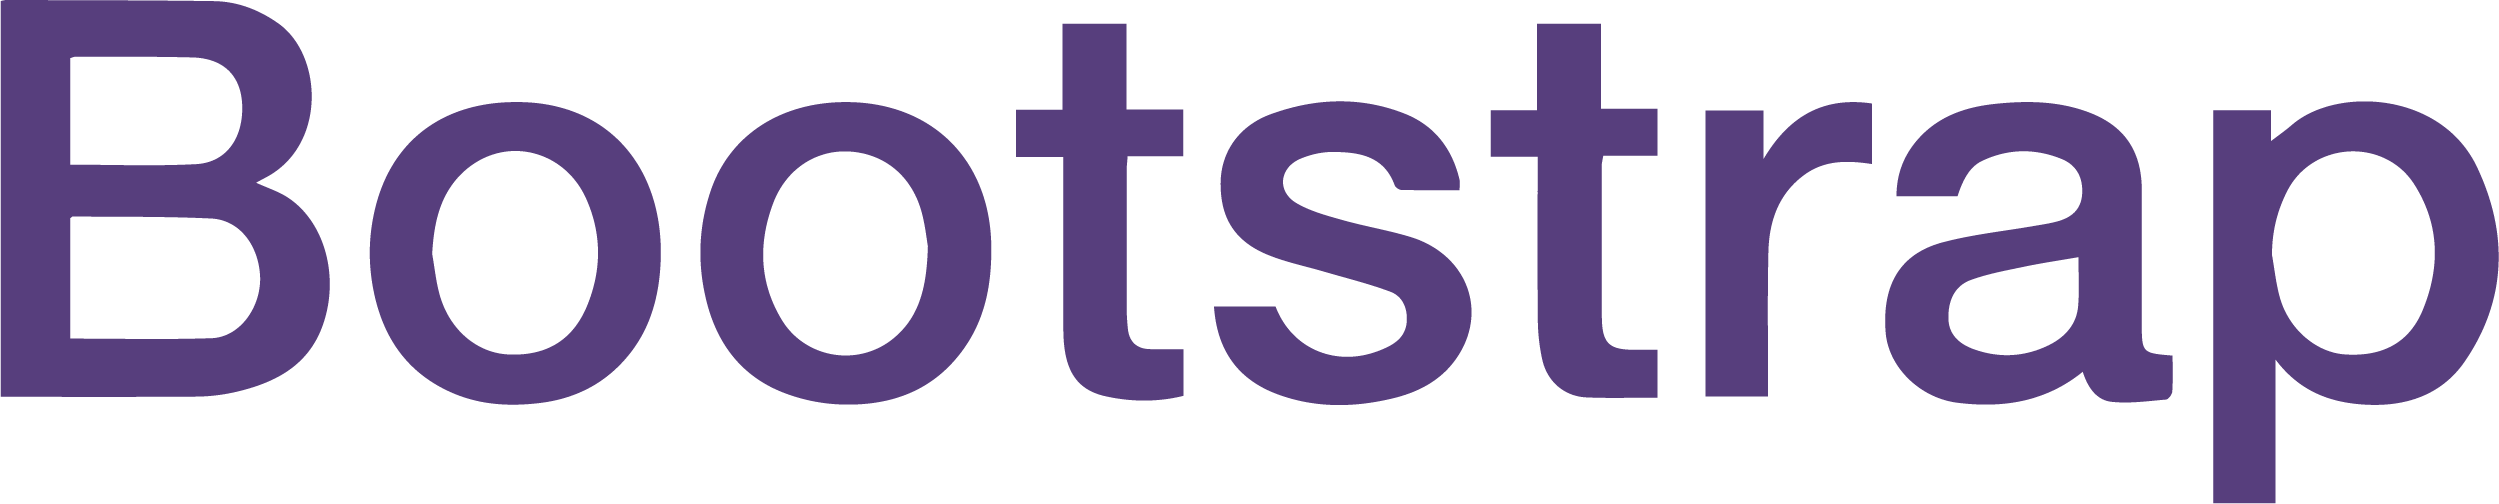 Bootstrap Logo png